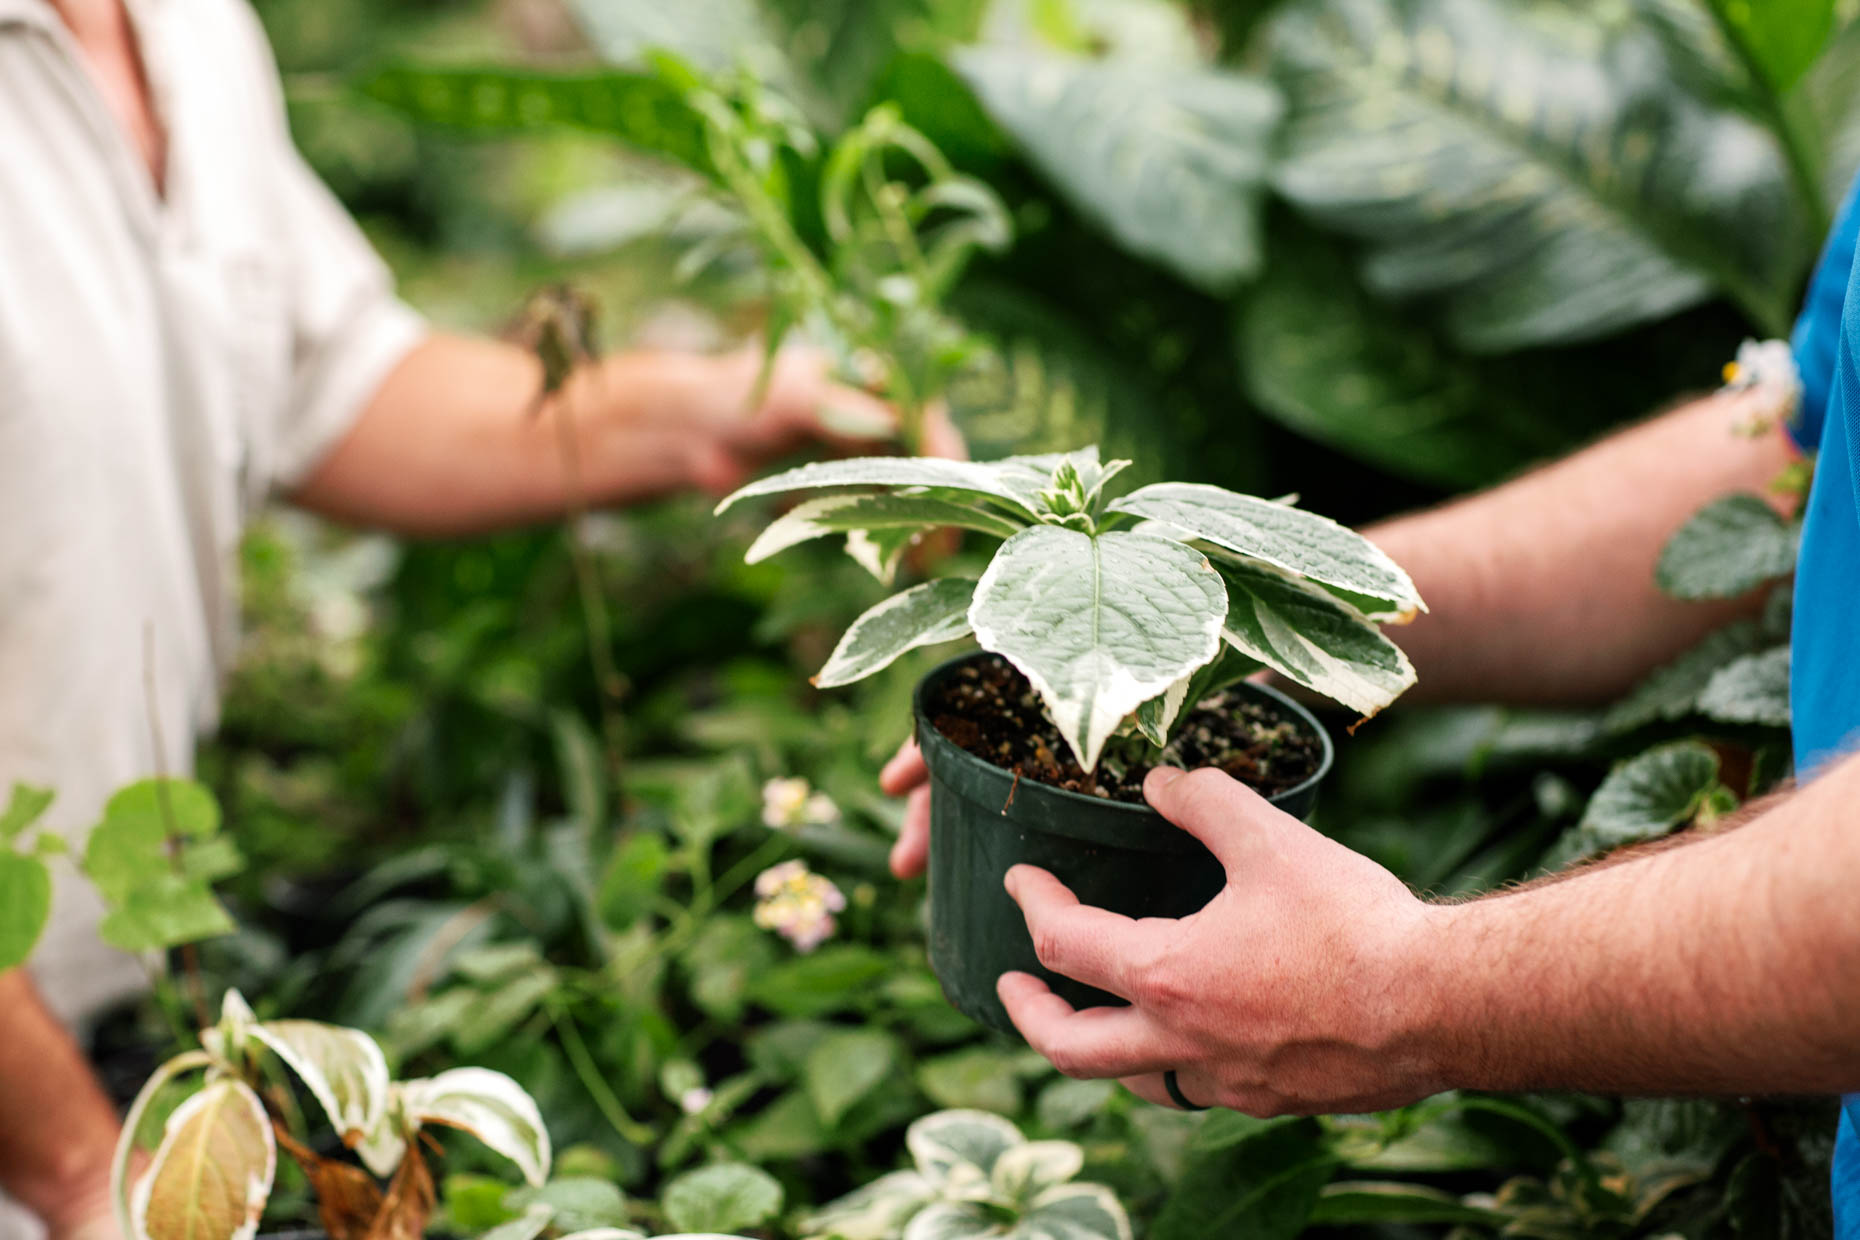 Prisoners working with plants to gain skills in horticulture